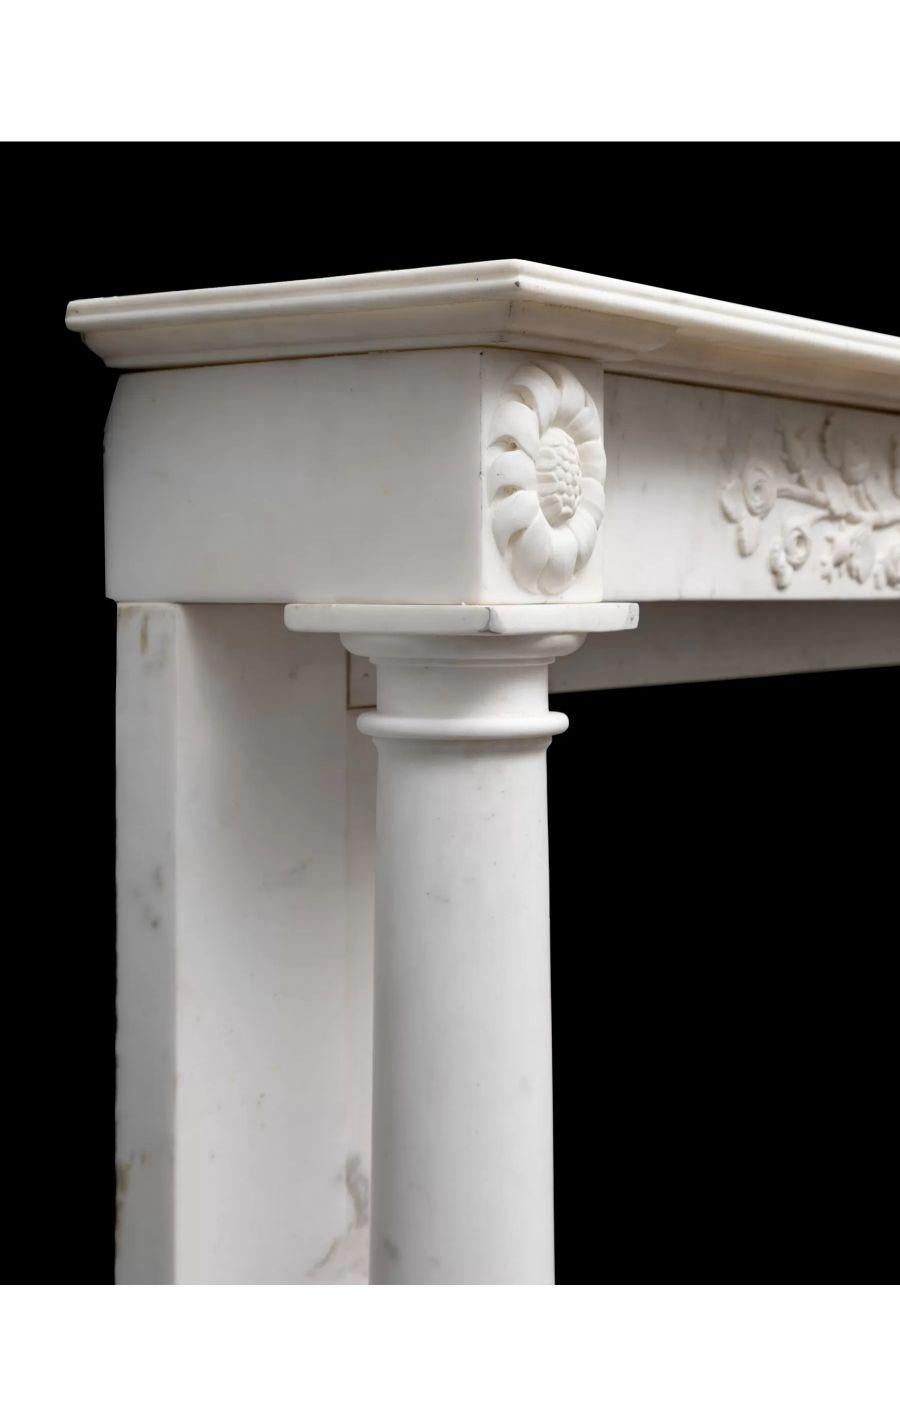 An antique Regency period Italian Statuary marble mantlepiece of fine quality.

Small in scale and beautifully made in Italy during the 1820’s, from the finest statuary marble.

The exquisitely carved frieze and end-blocks supported on Doric columns